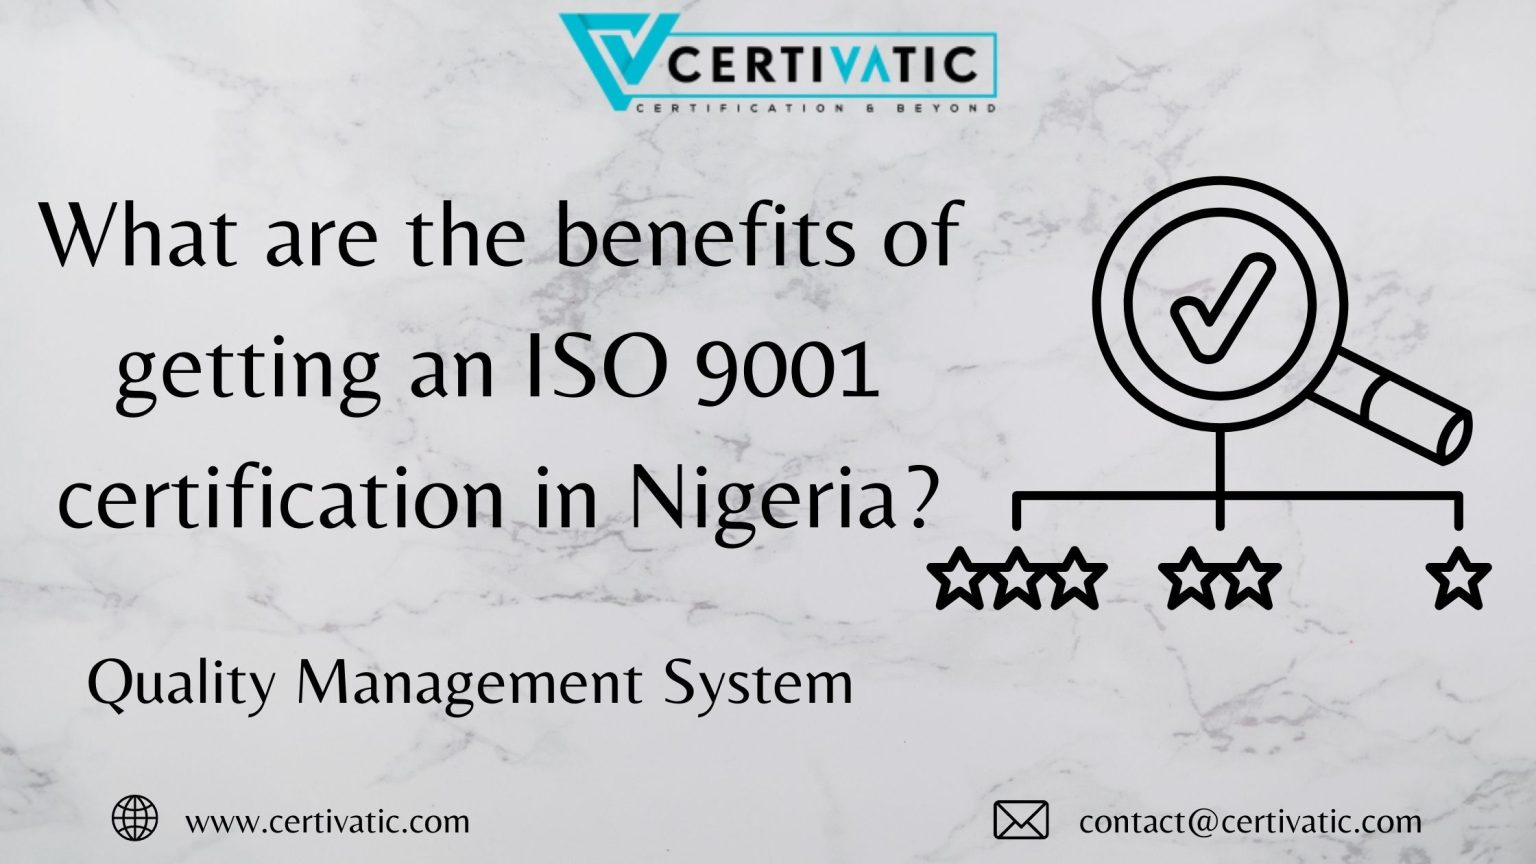 What are the benefits of getting an ISO 9001 certification in Nigeria?